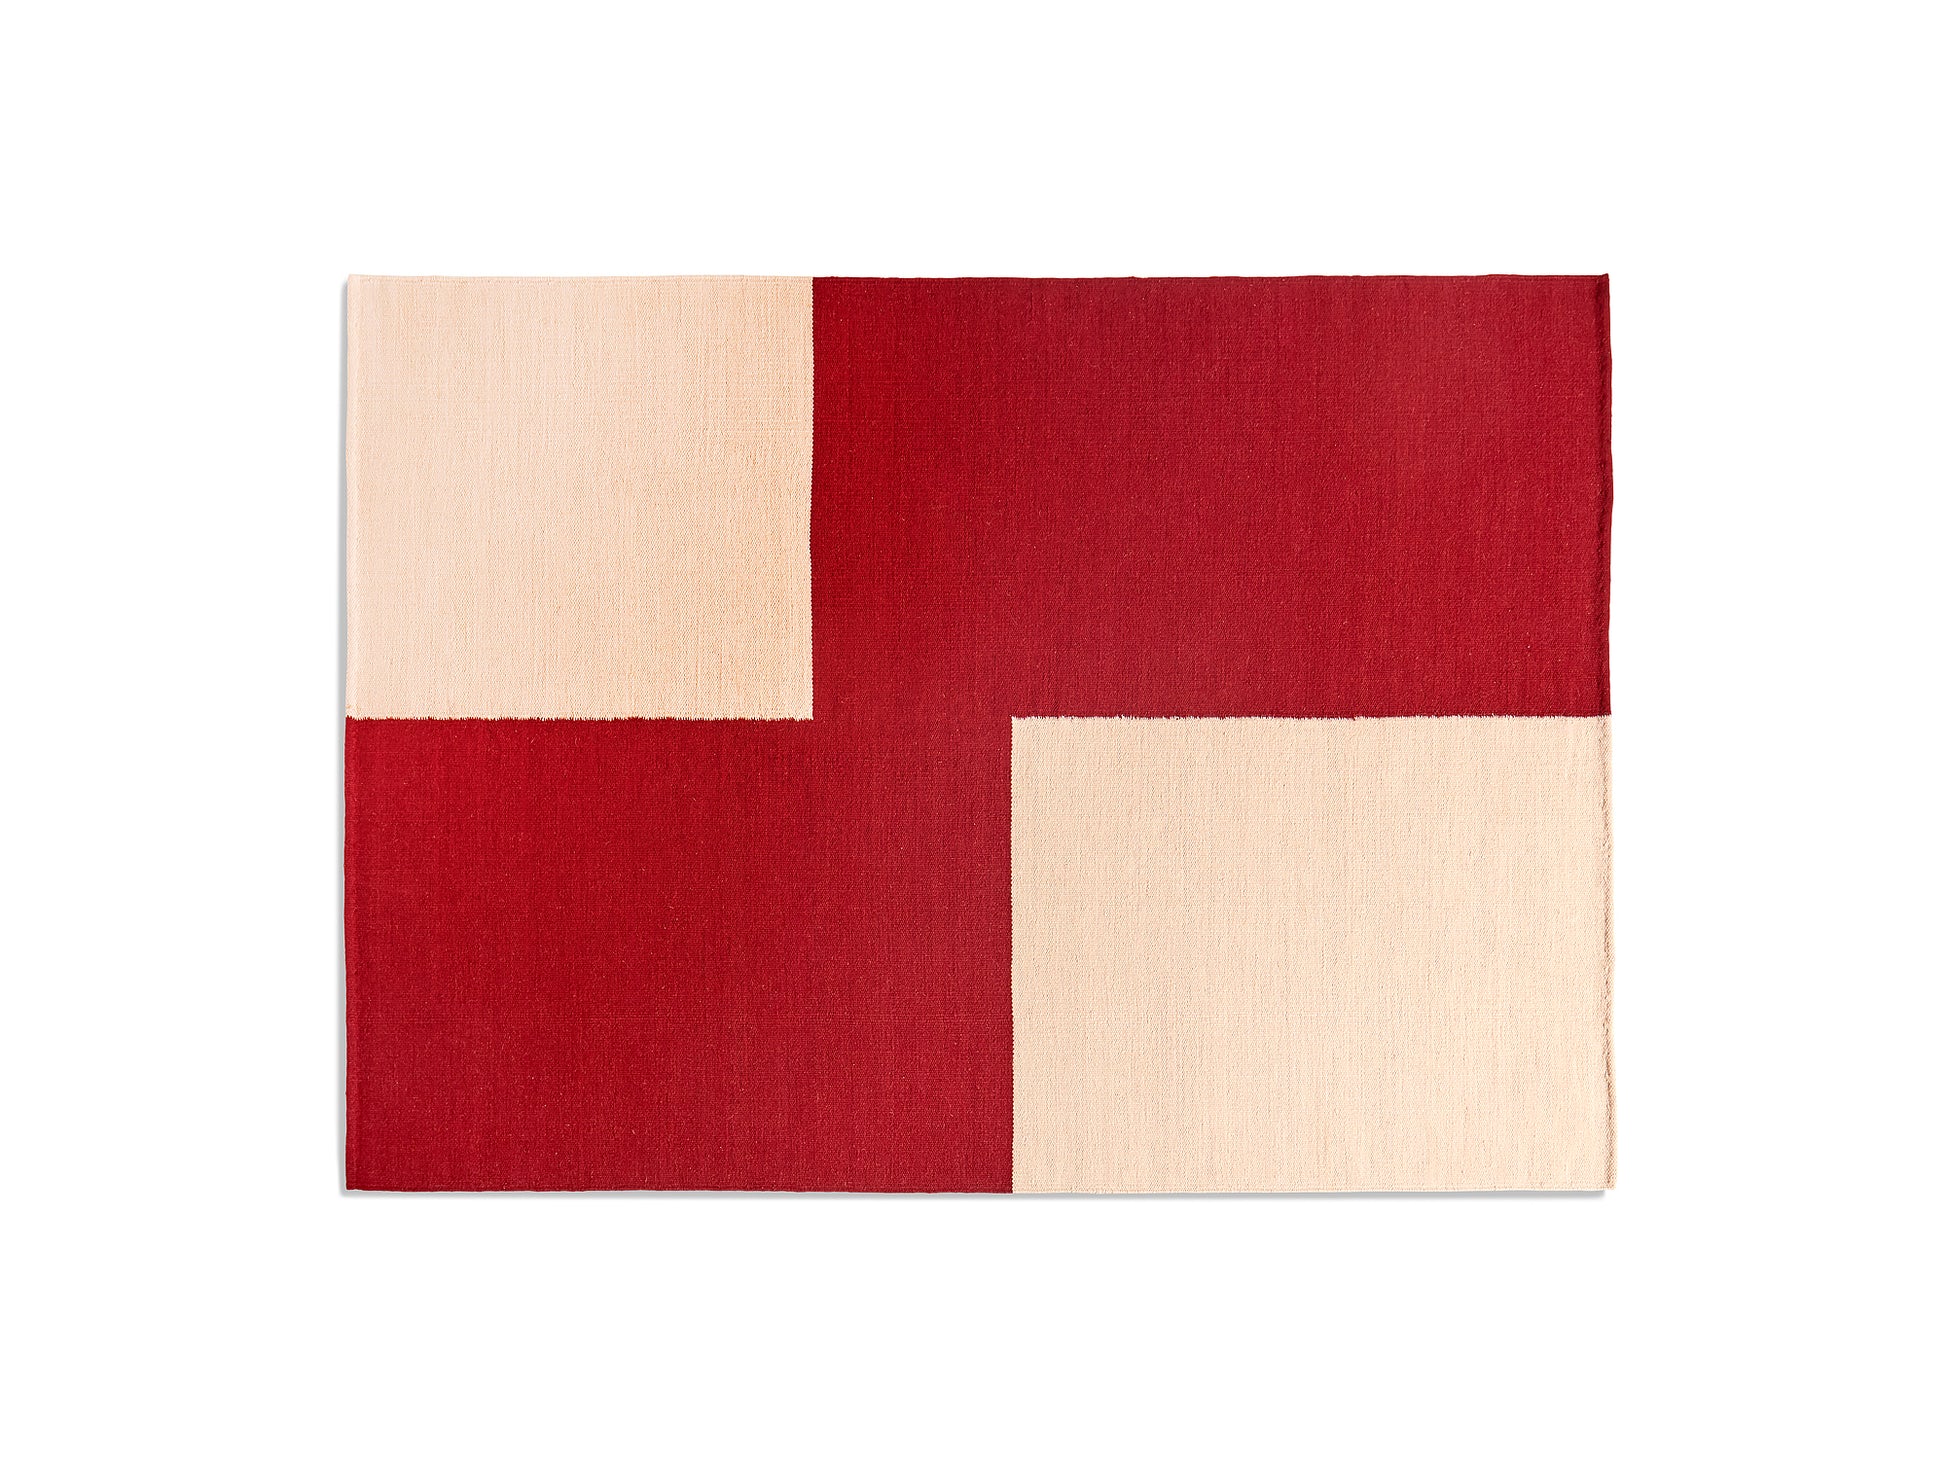 170 x 240 cm / Red Offset / Ethan Cook Flat Works Rug by HAY